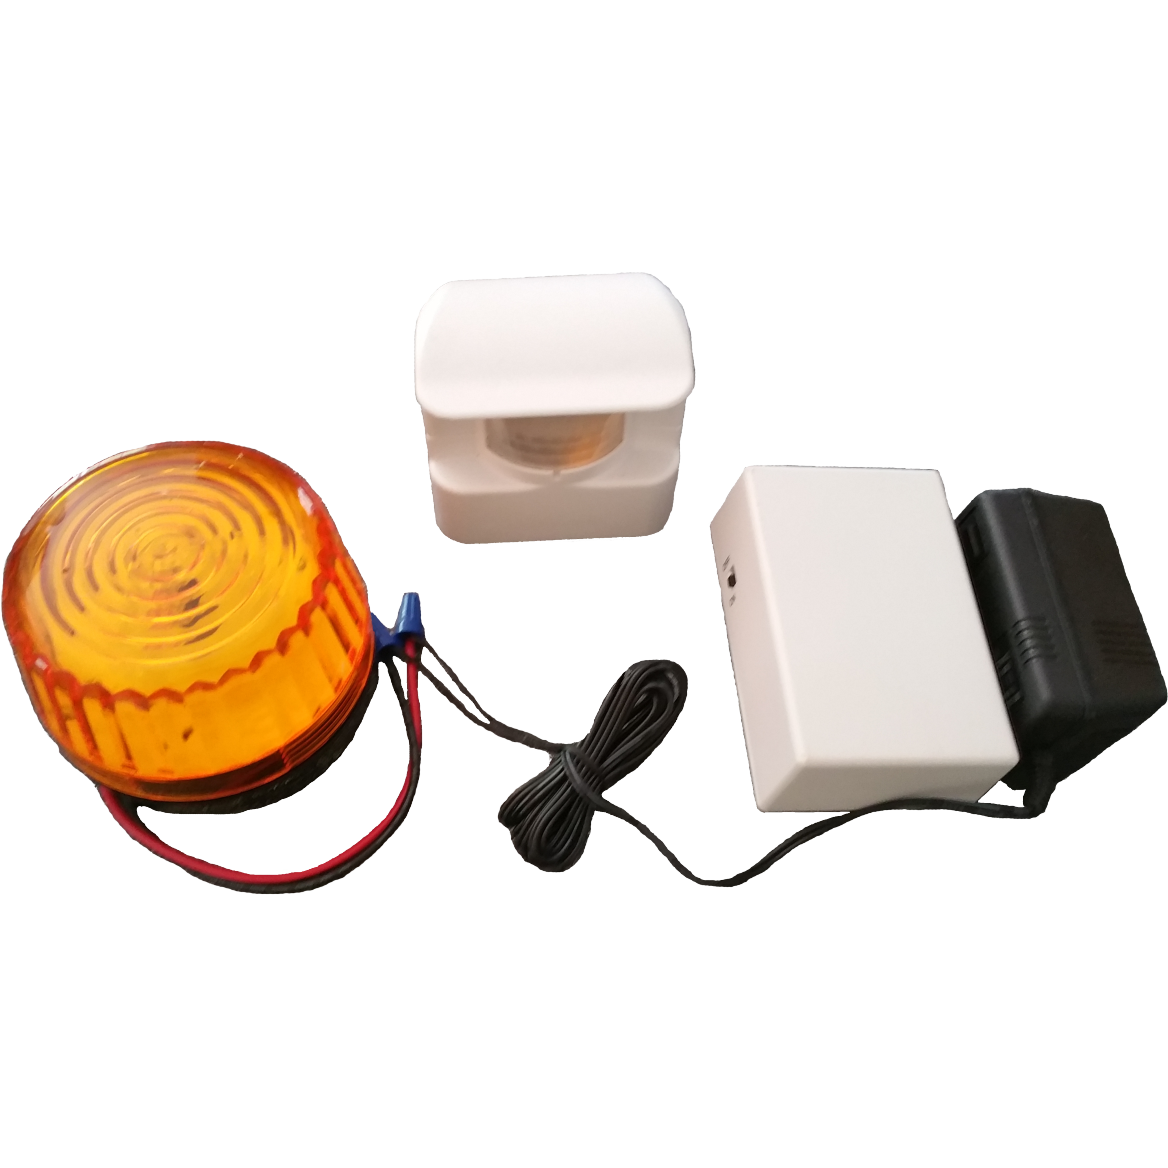 Motion activated sensor with remote strobe ( HS3605) RC 24